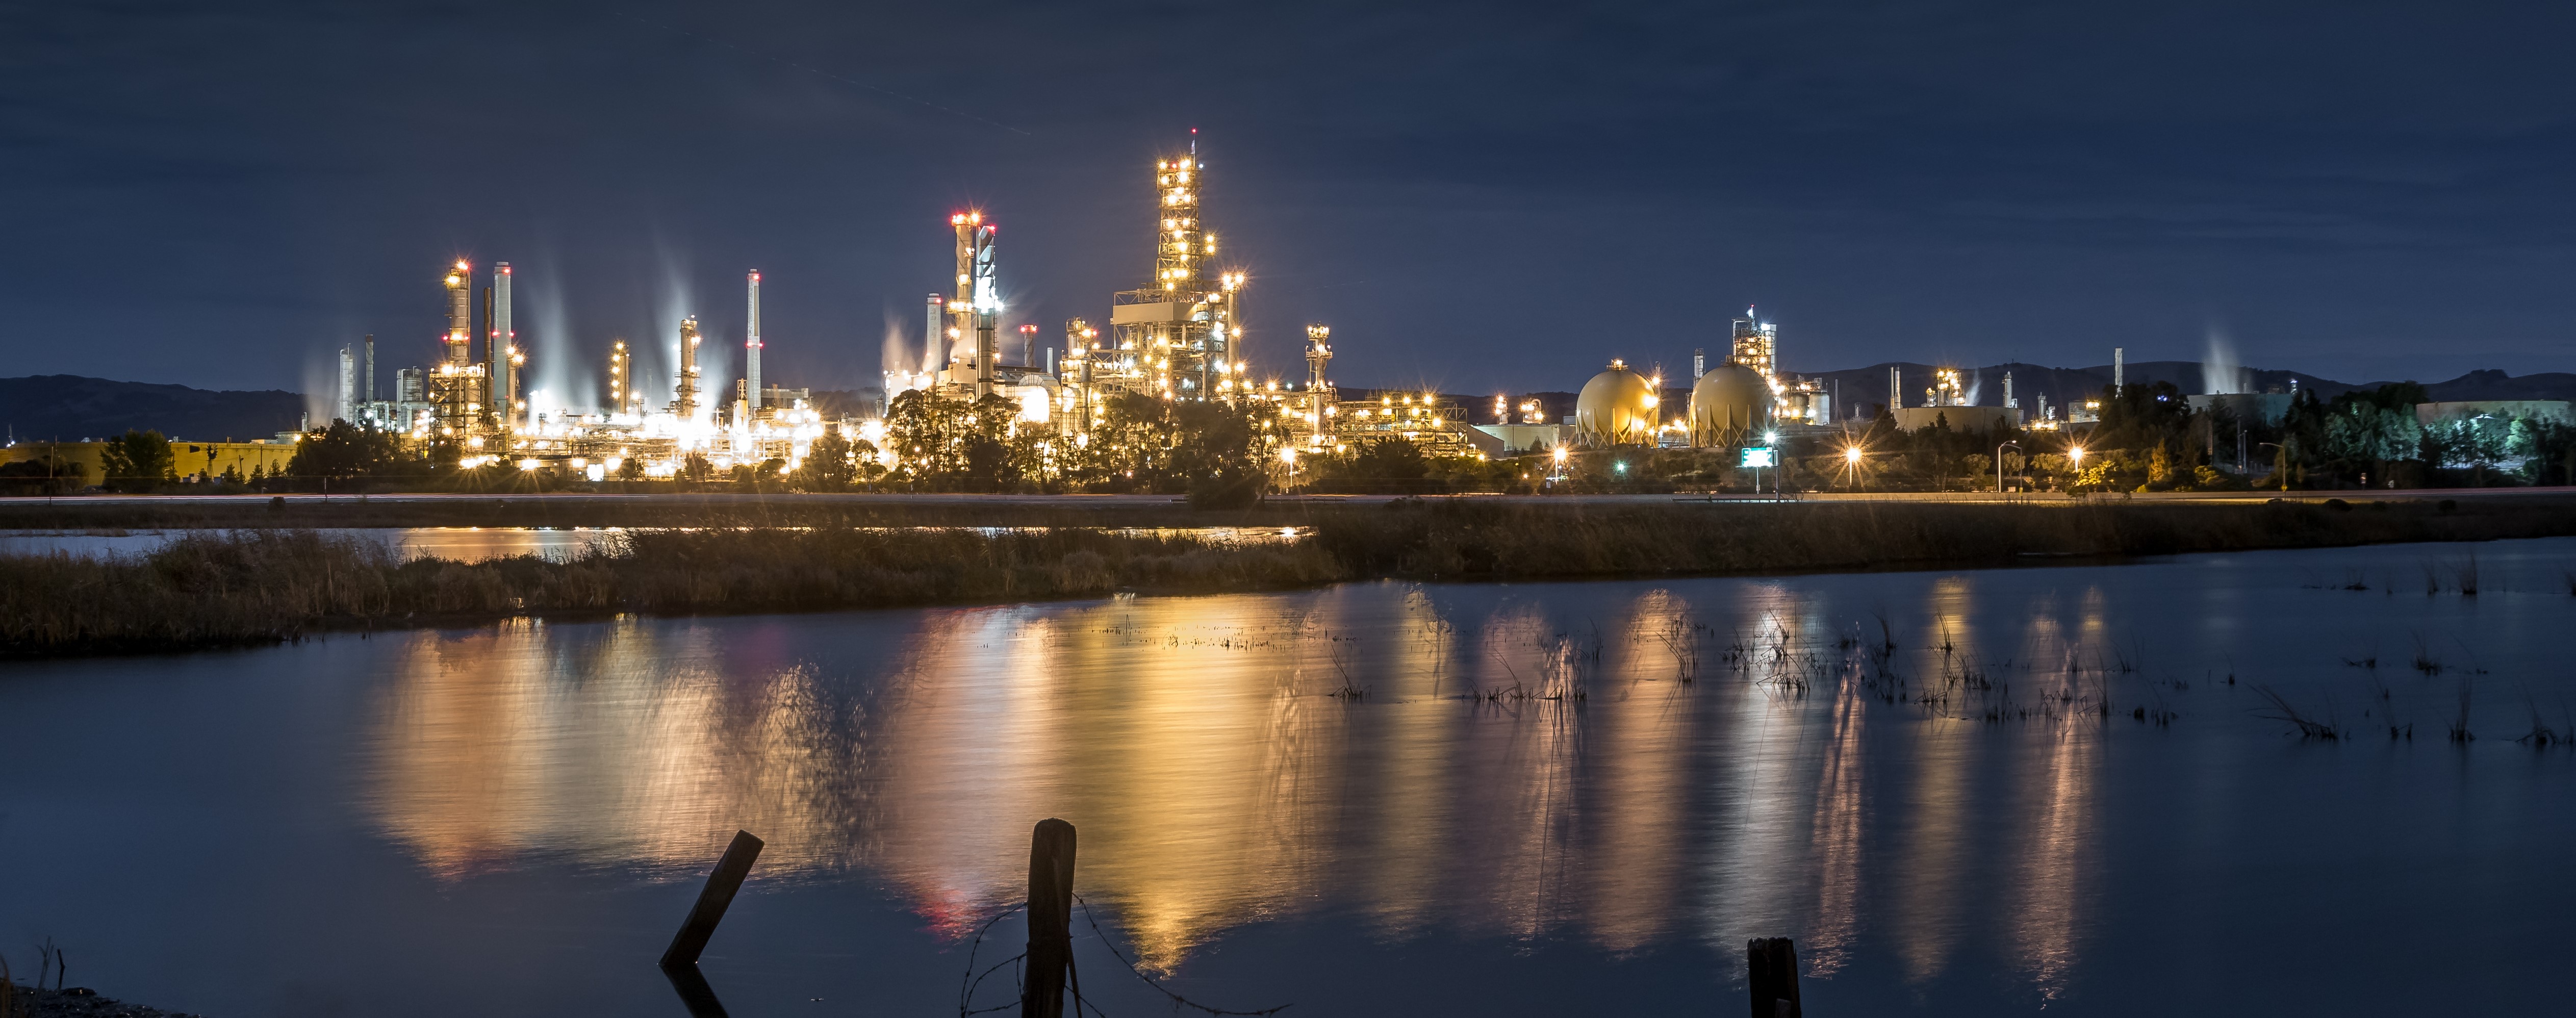 Martinez refinery lit up at night over the Bay.